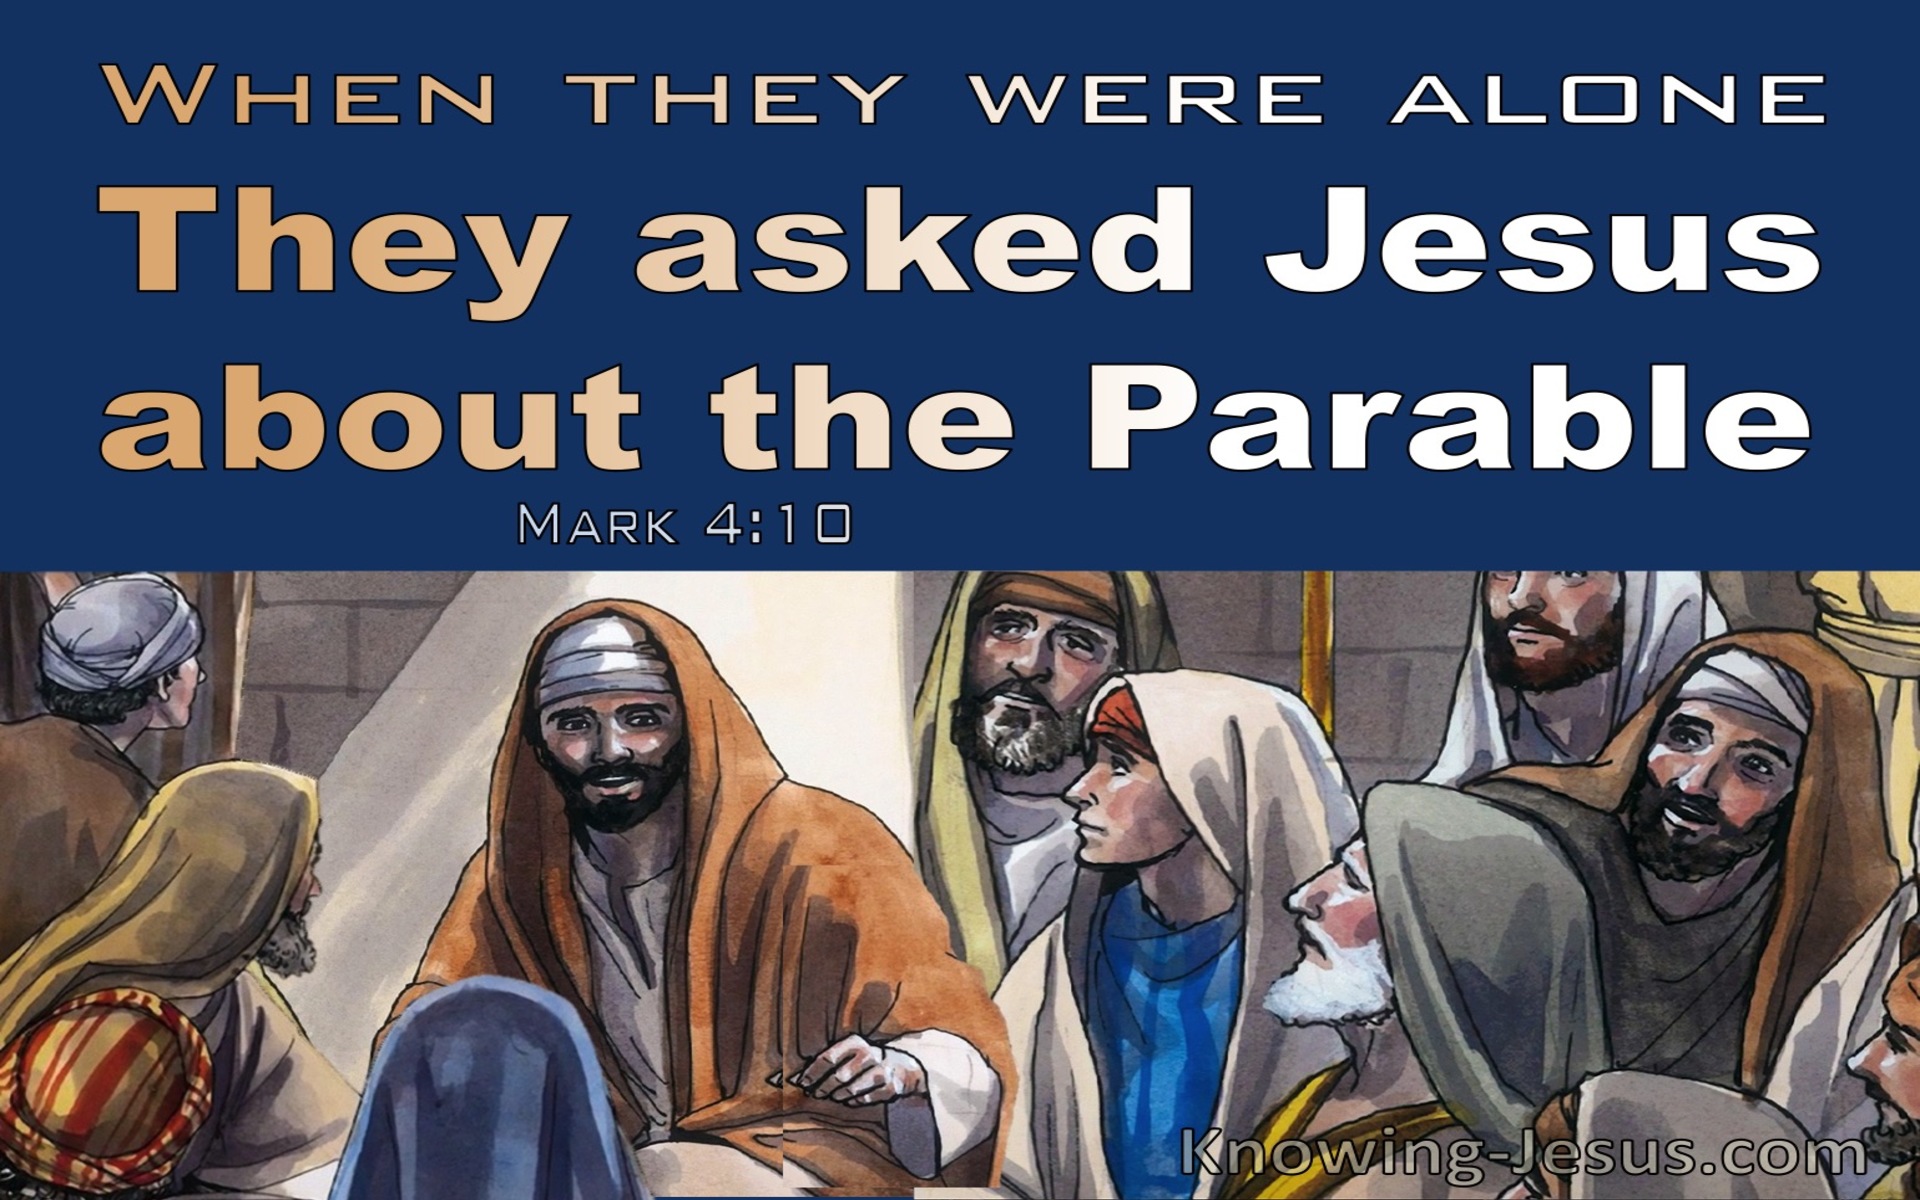 Mark 4:10 The Twelve Asked Him About The Parable (blue)